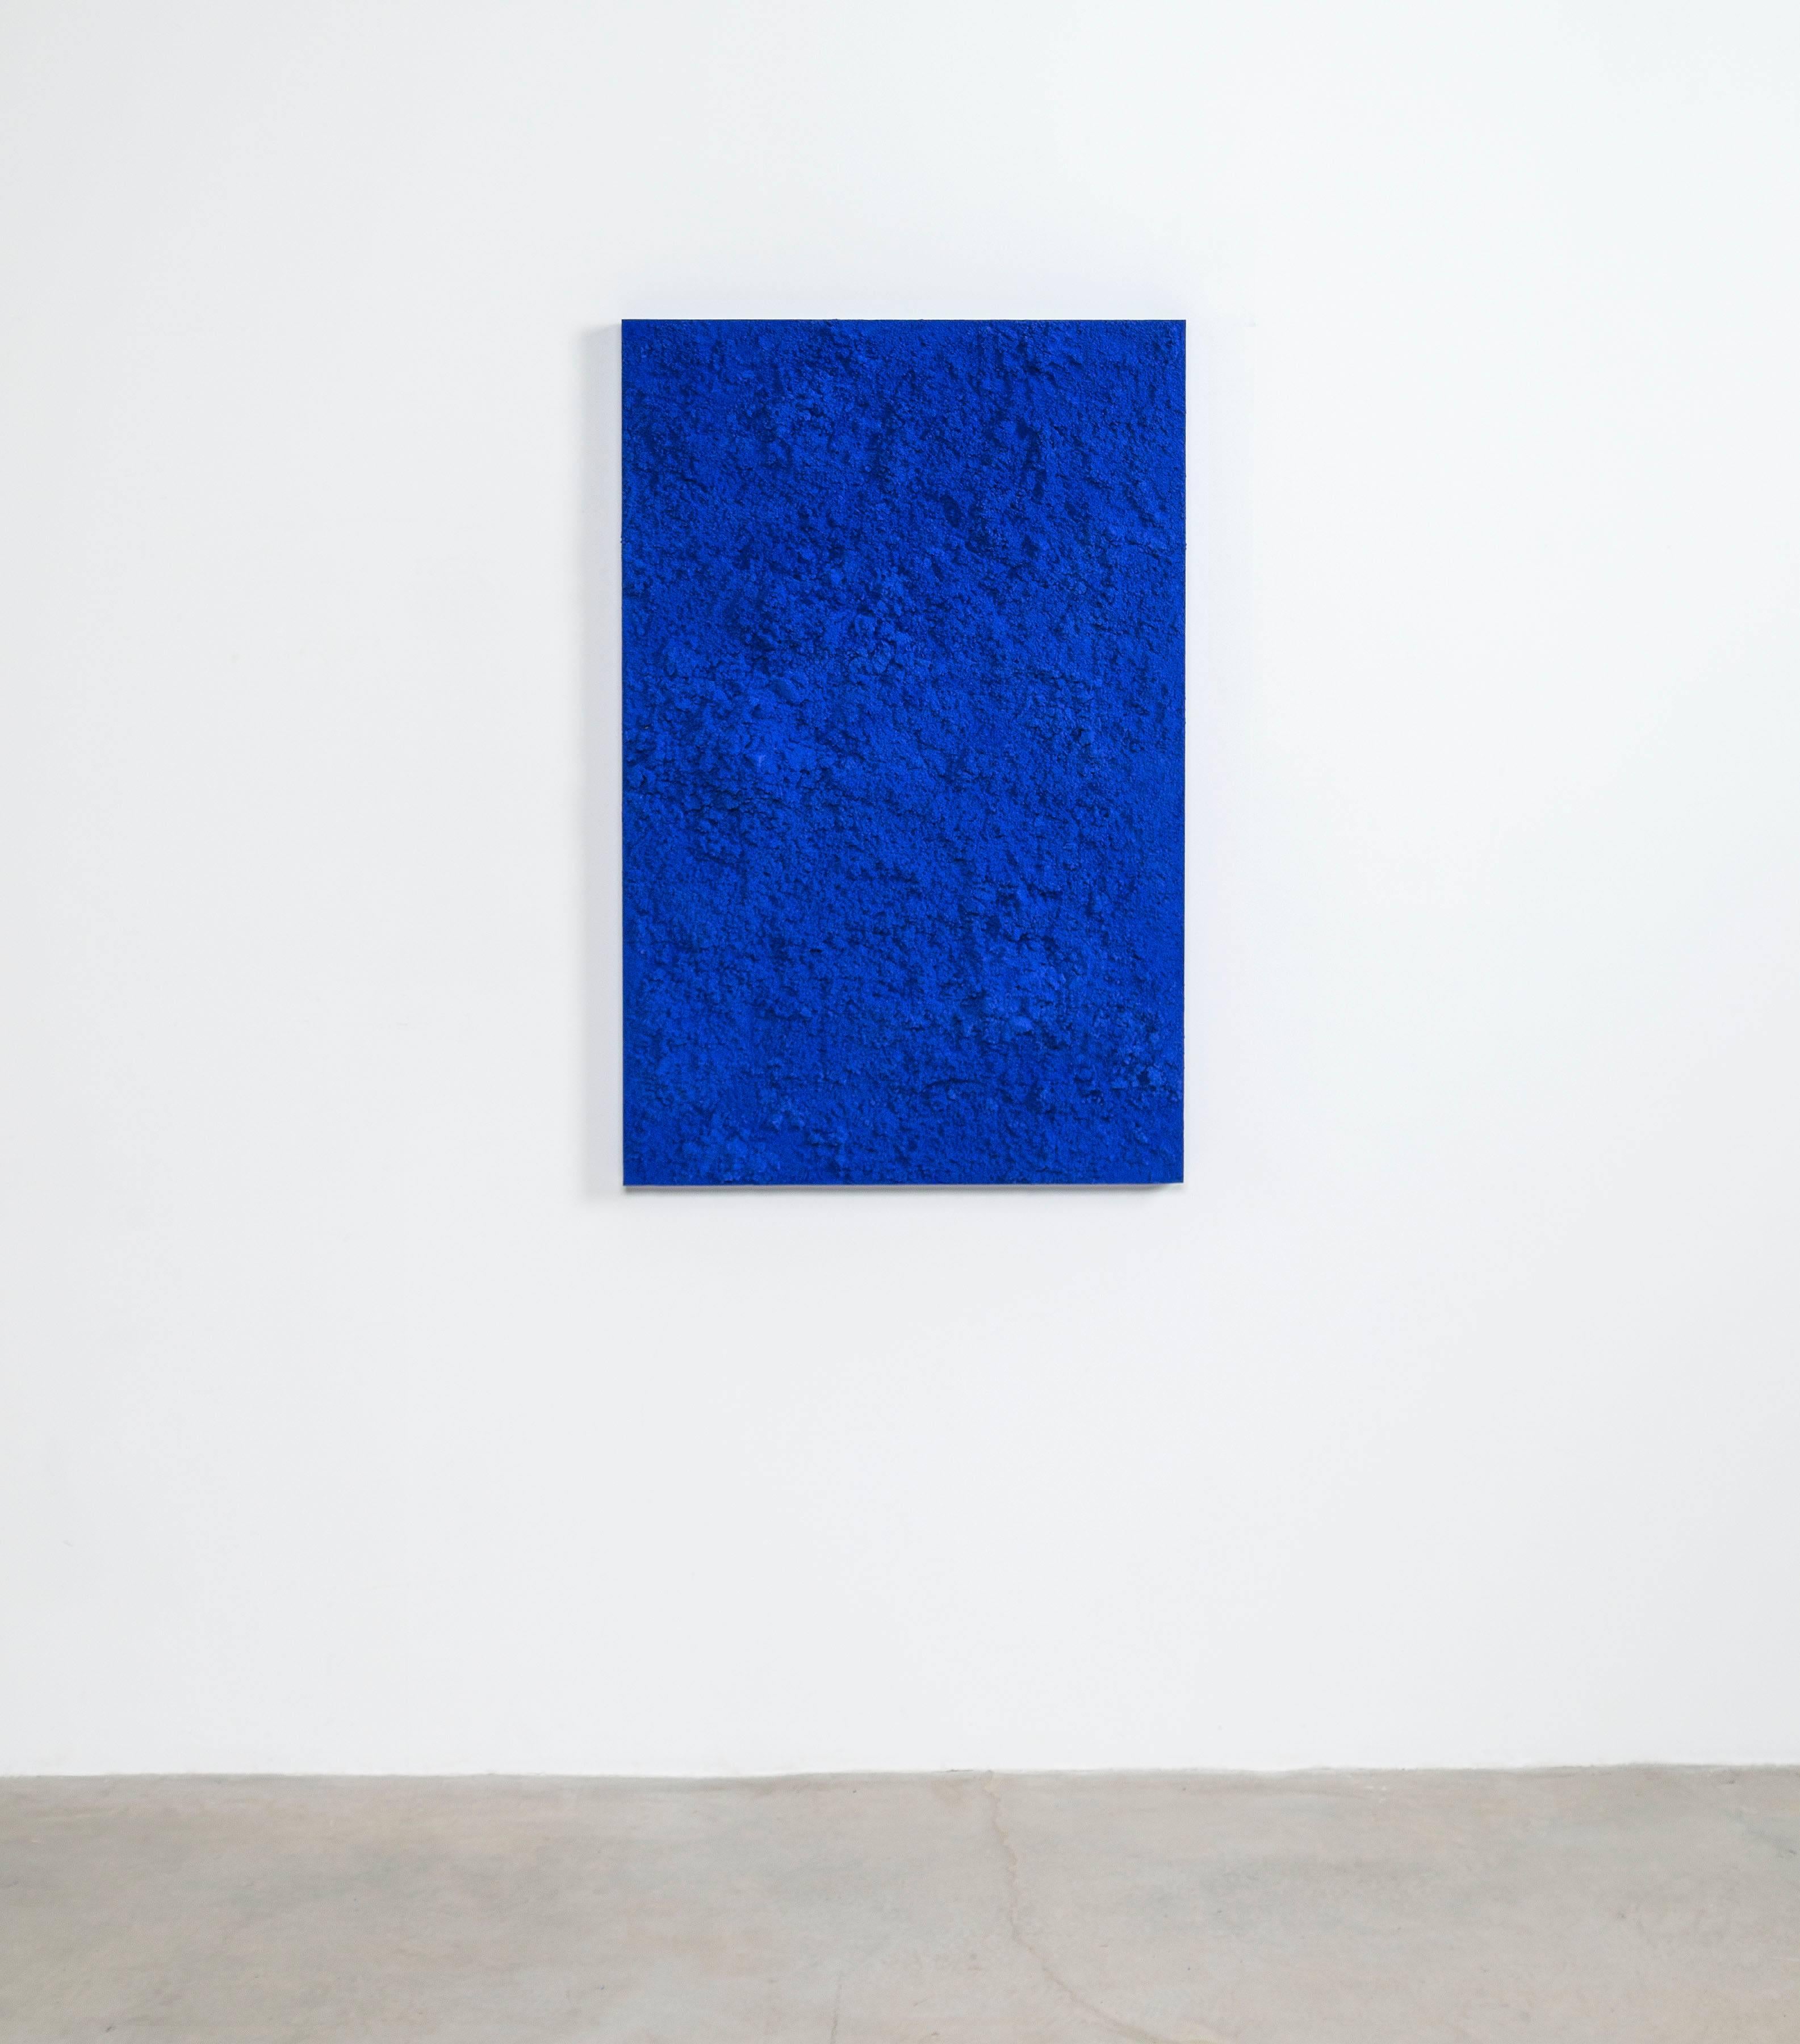 Through a layering of hand-dyed sand, the painting is organically textured and strikingly unadorned. The mass of bright blue granules come together in a terrain-like abstraction.